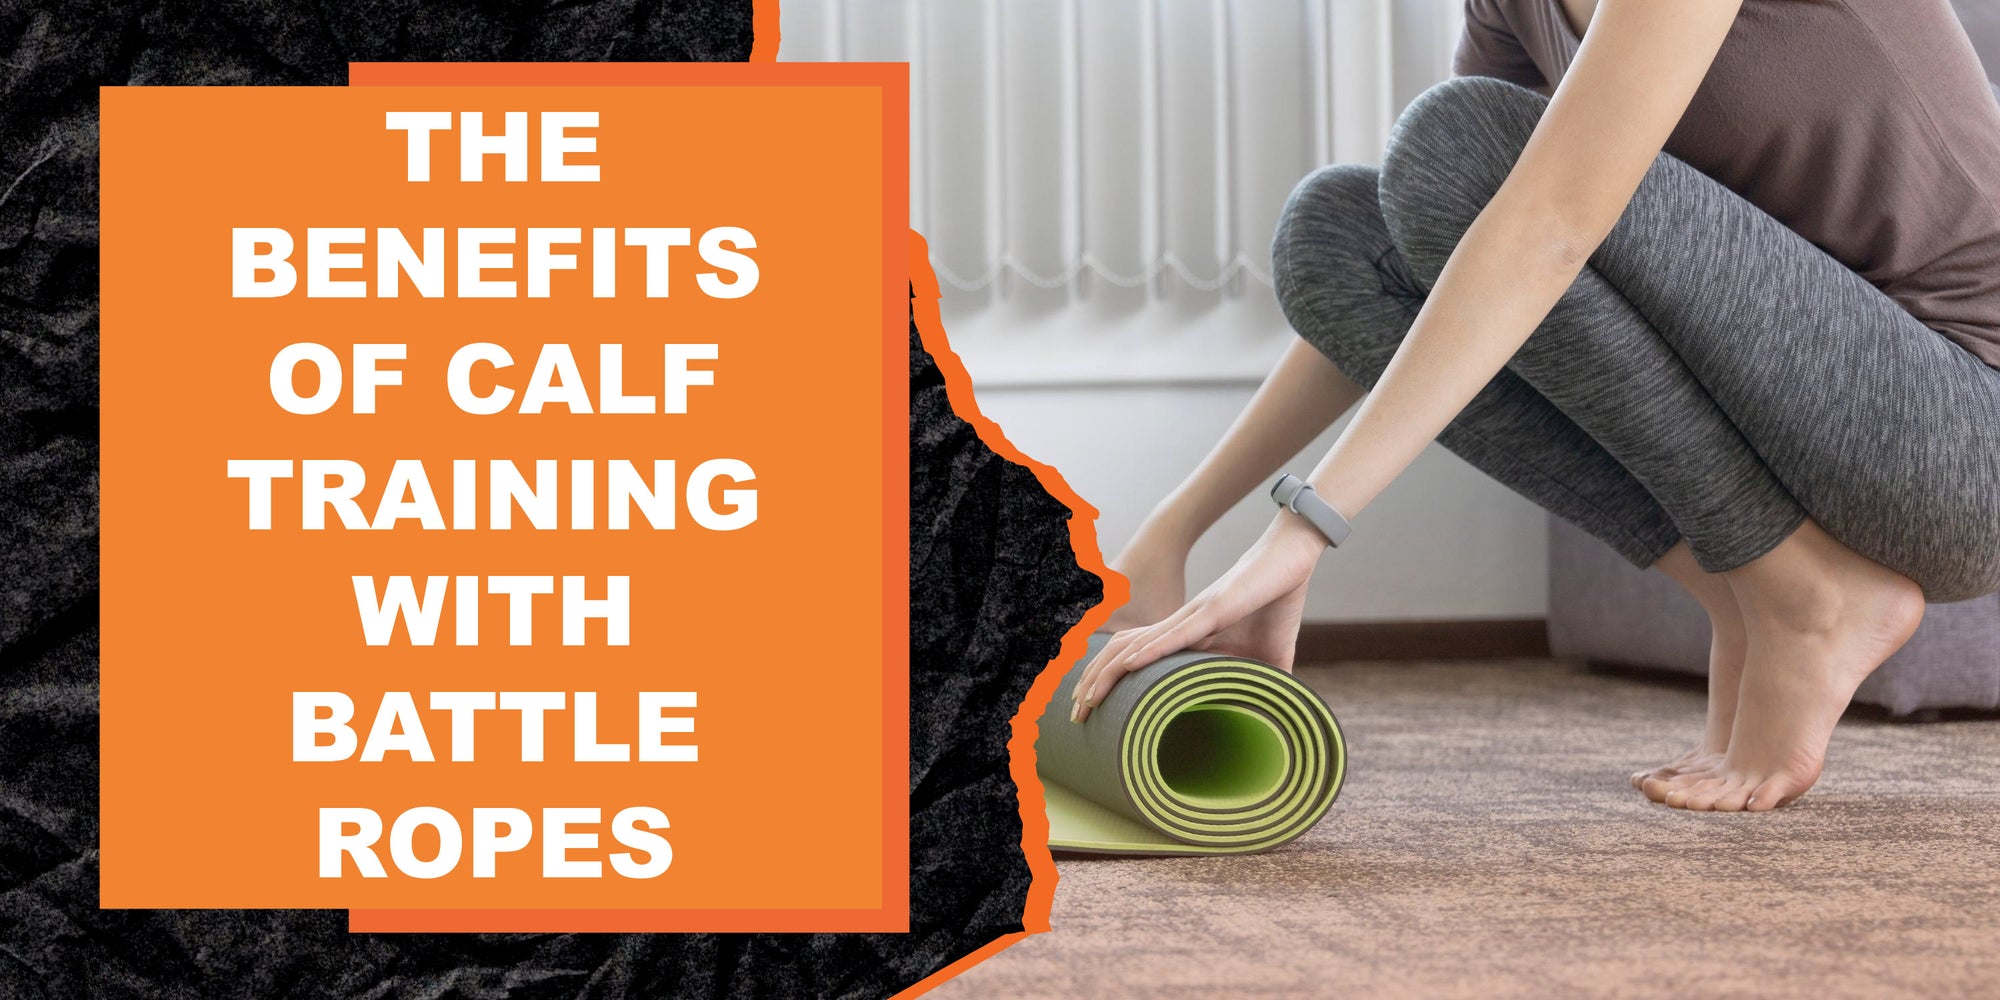 The Benefits of Calf Training with Battle Ropes